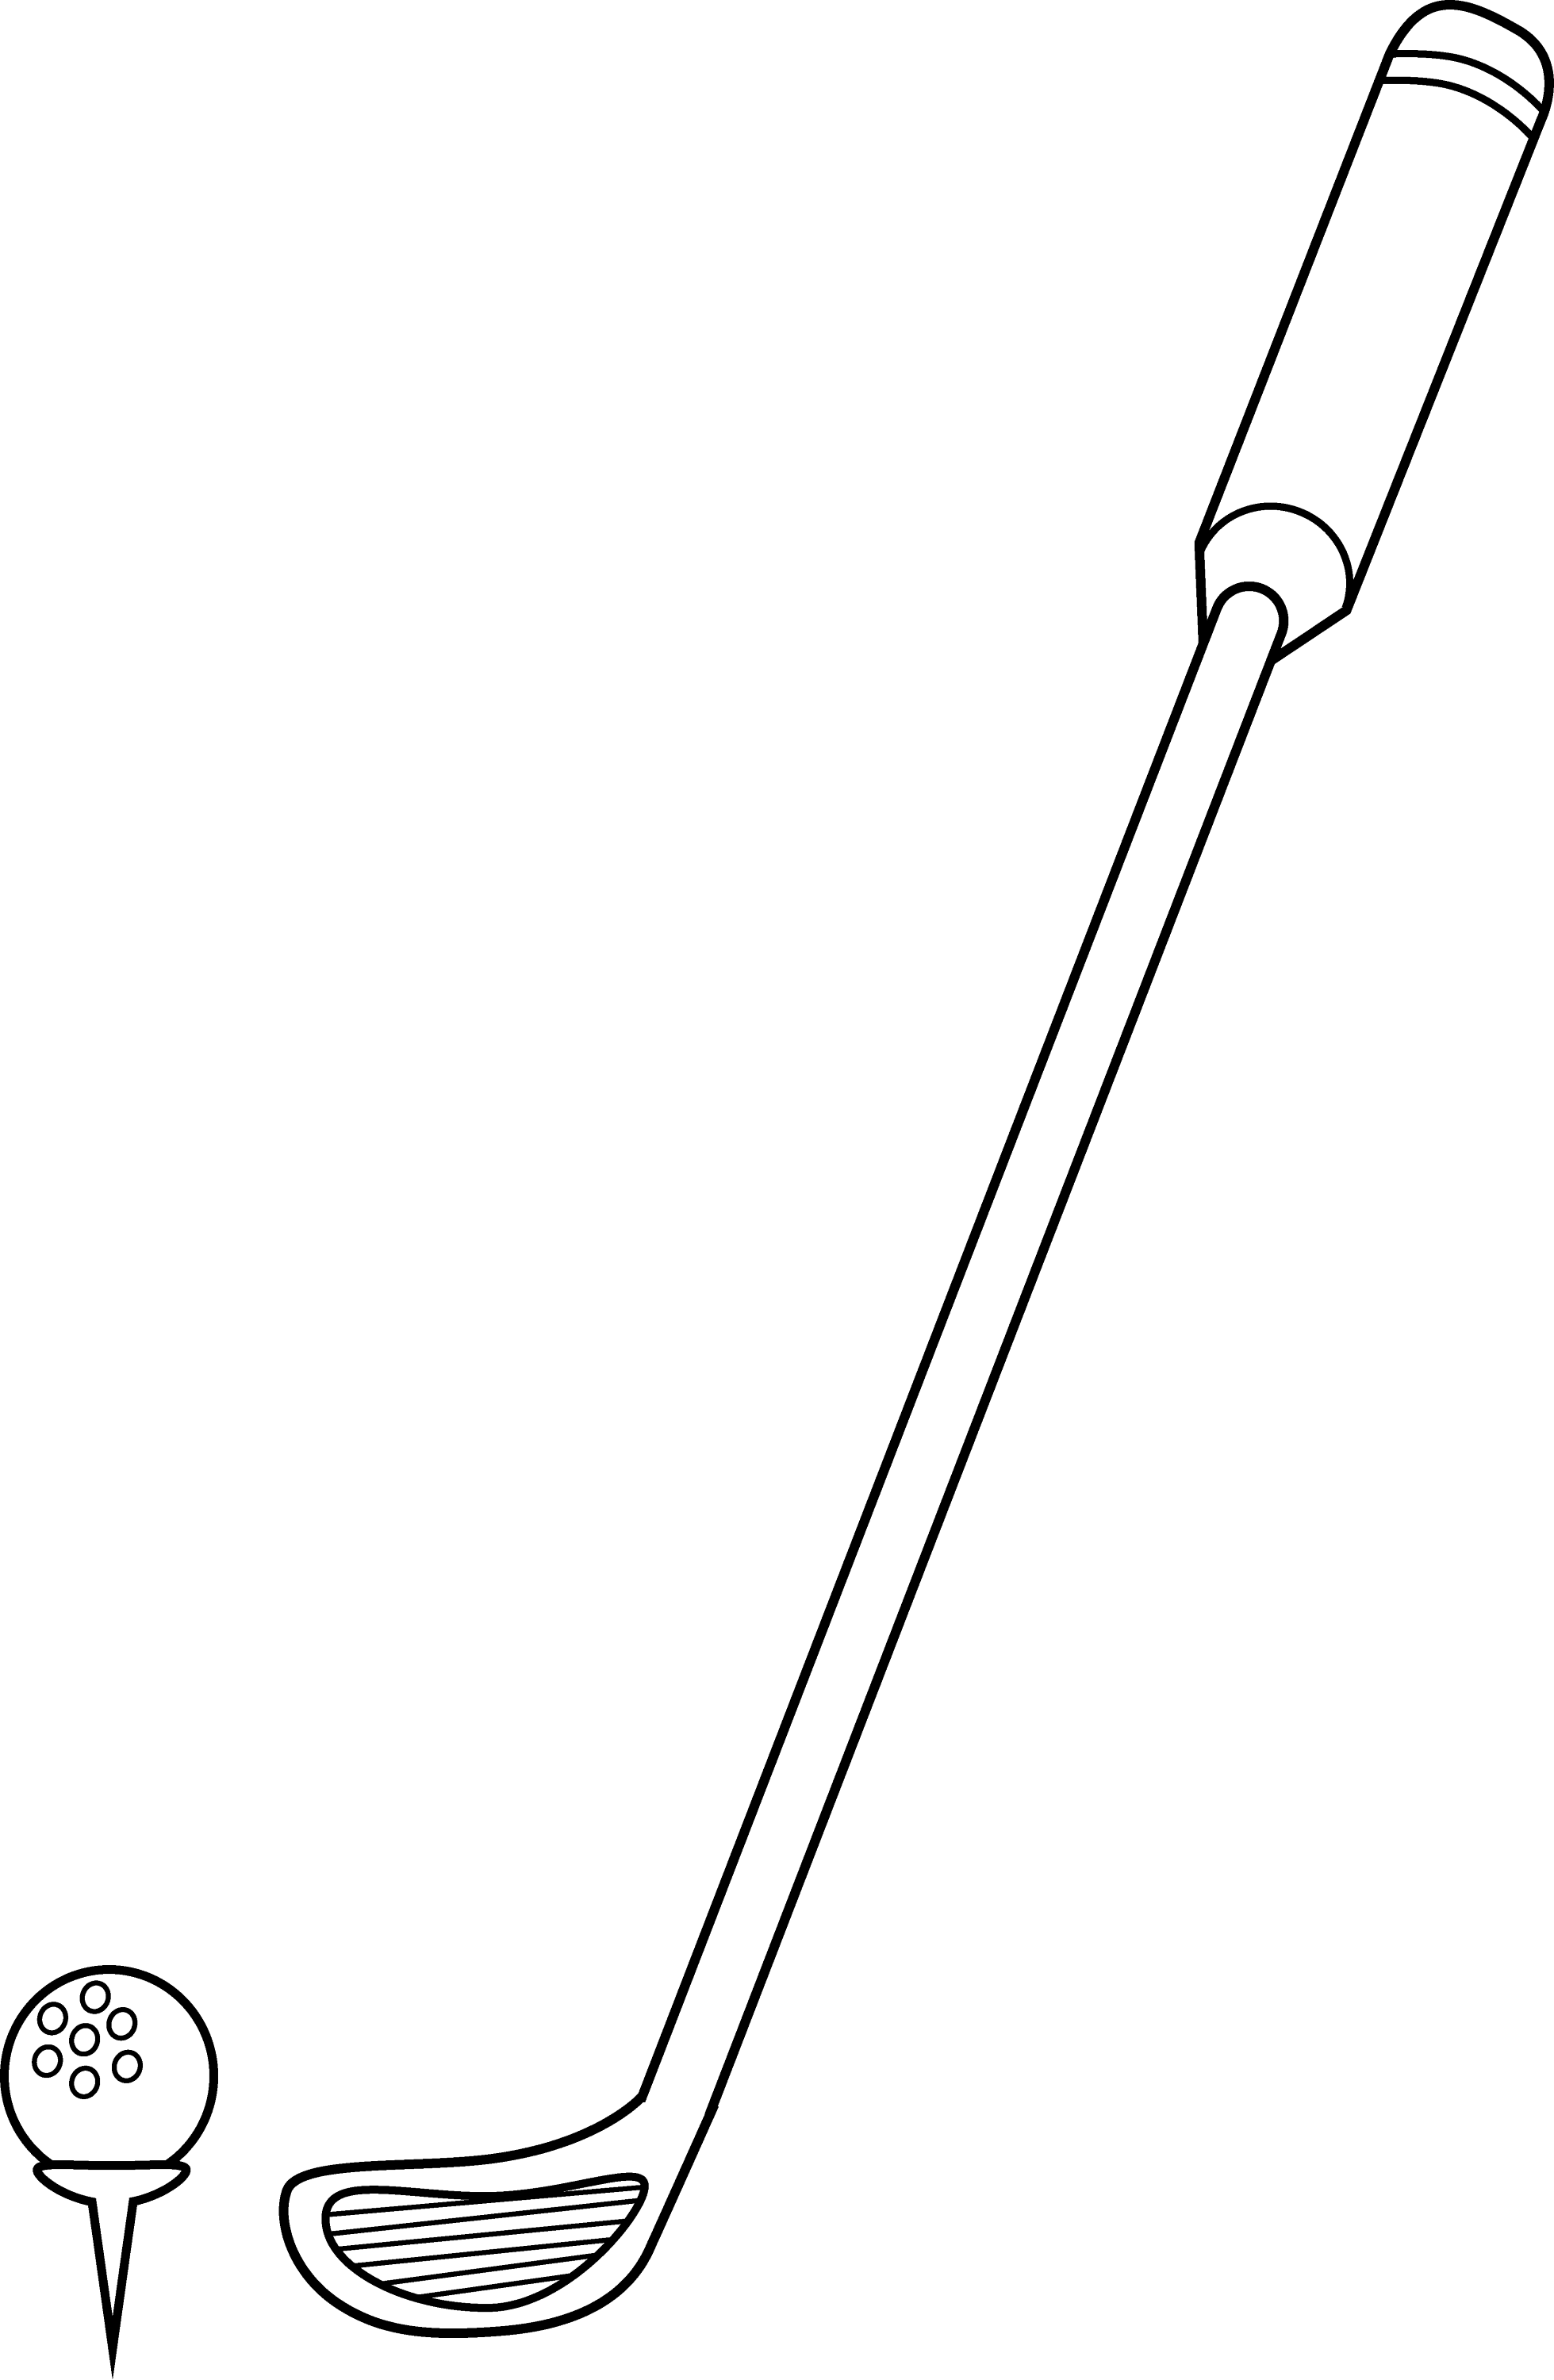 free golf clipart black and white - photo #26